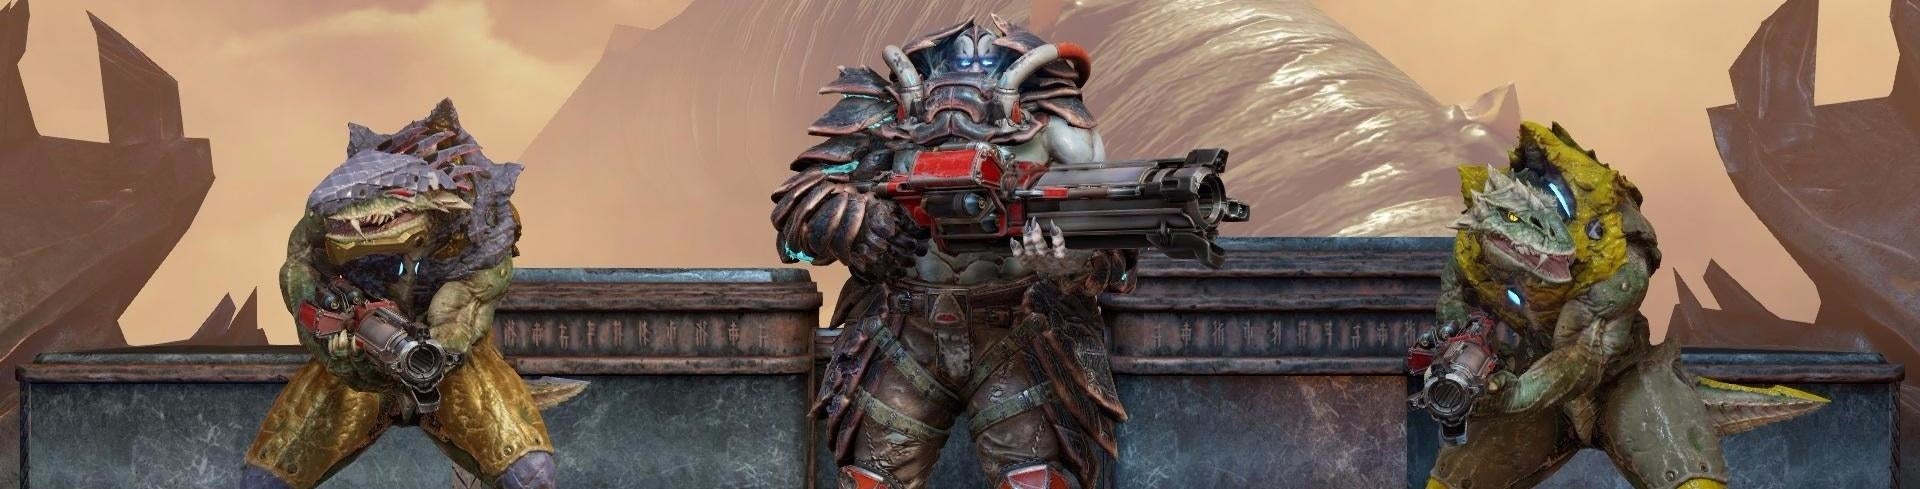 Image for Quake Champions is an old school first-person shooter done right